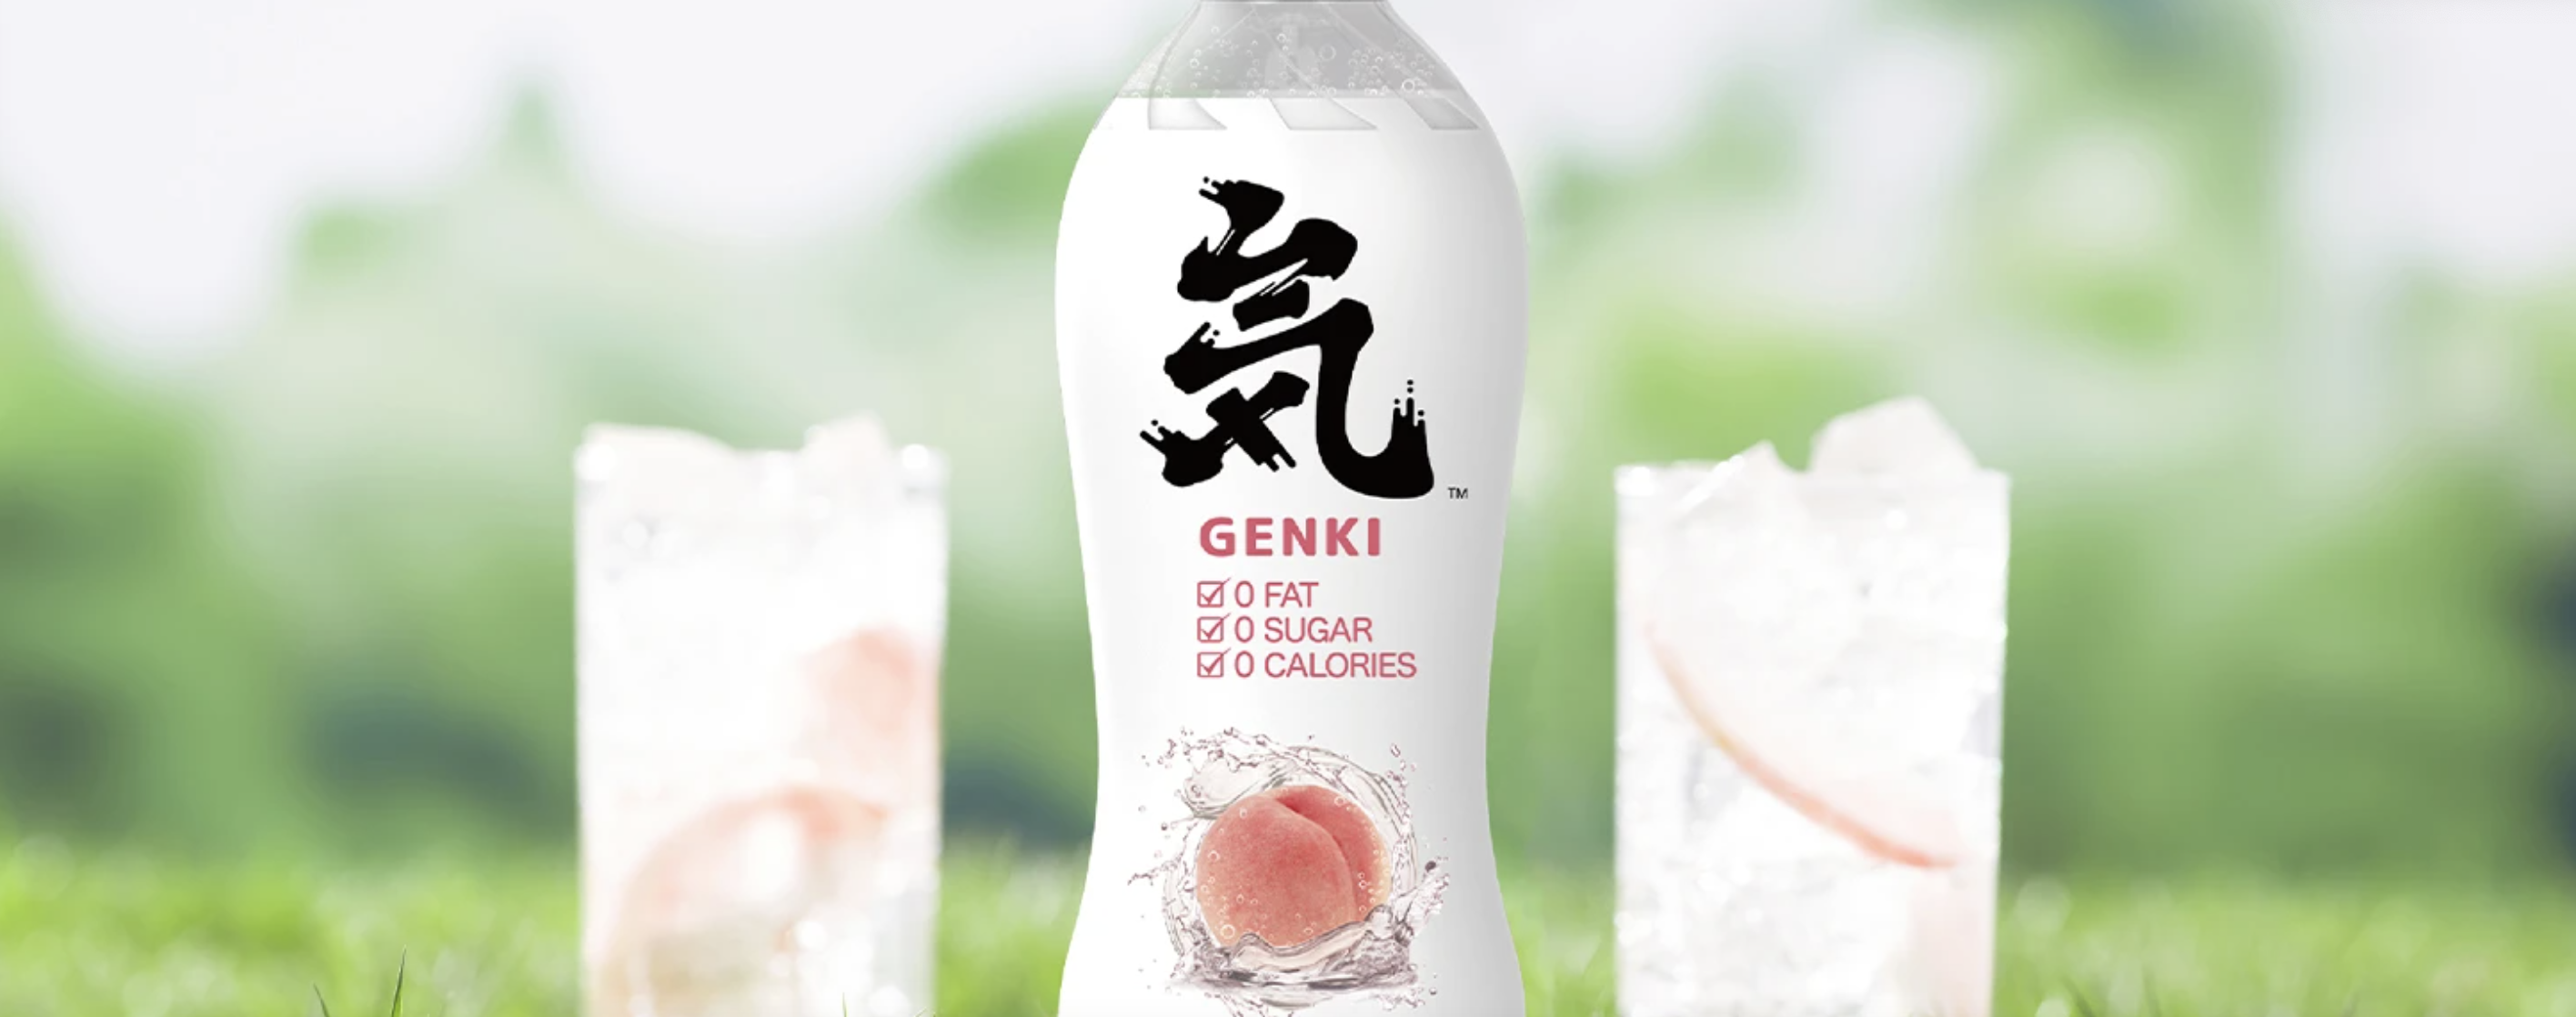 China’s fast-growing sparkling water maker Genki Forest wants to grow faster, will it succeed? (Part 1)